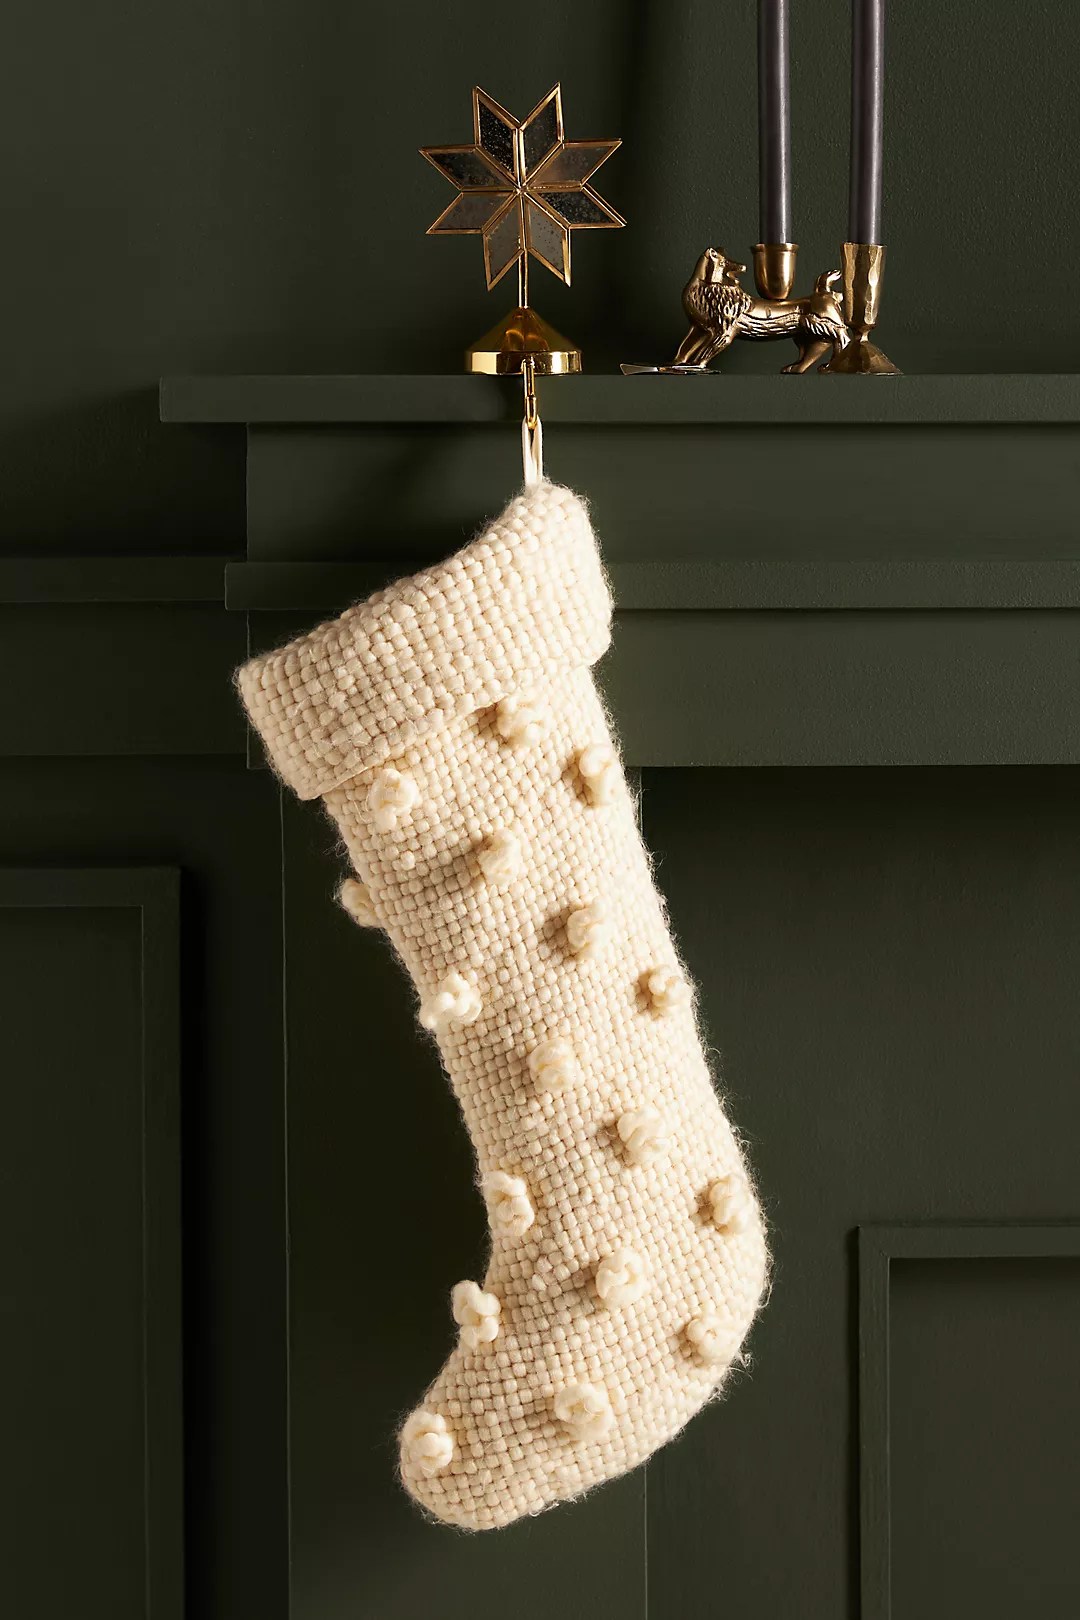 cozy bobble socks from anthropologie's black friday sale hanging from green capes